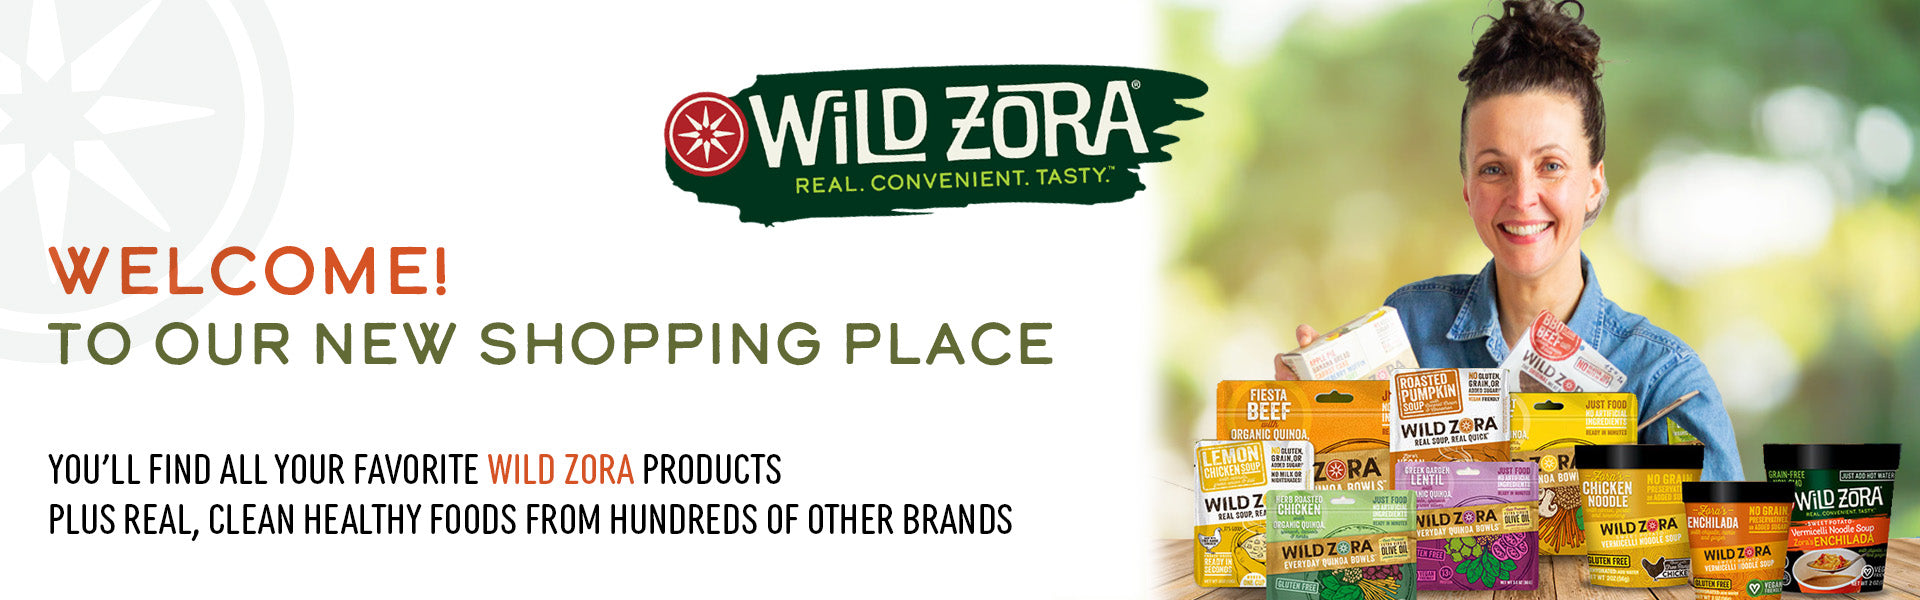 Wild Zora Products Available at Fullyhealthy.com